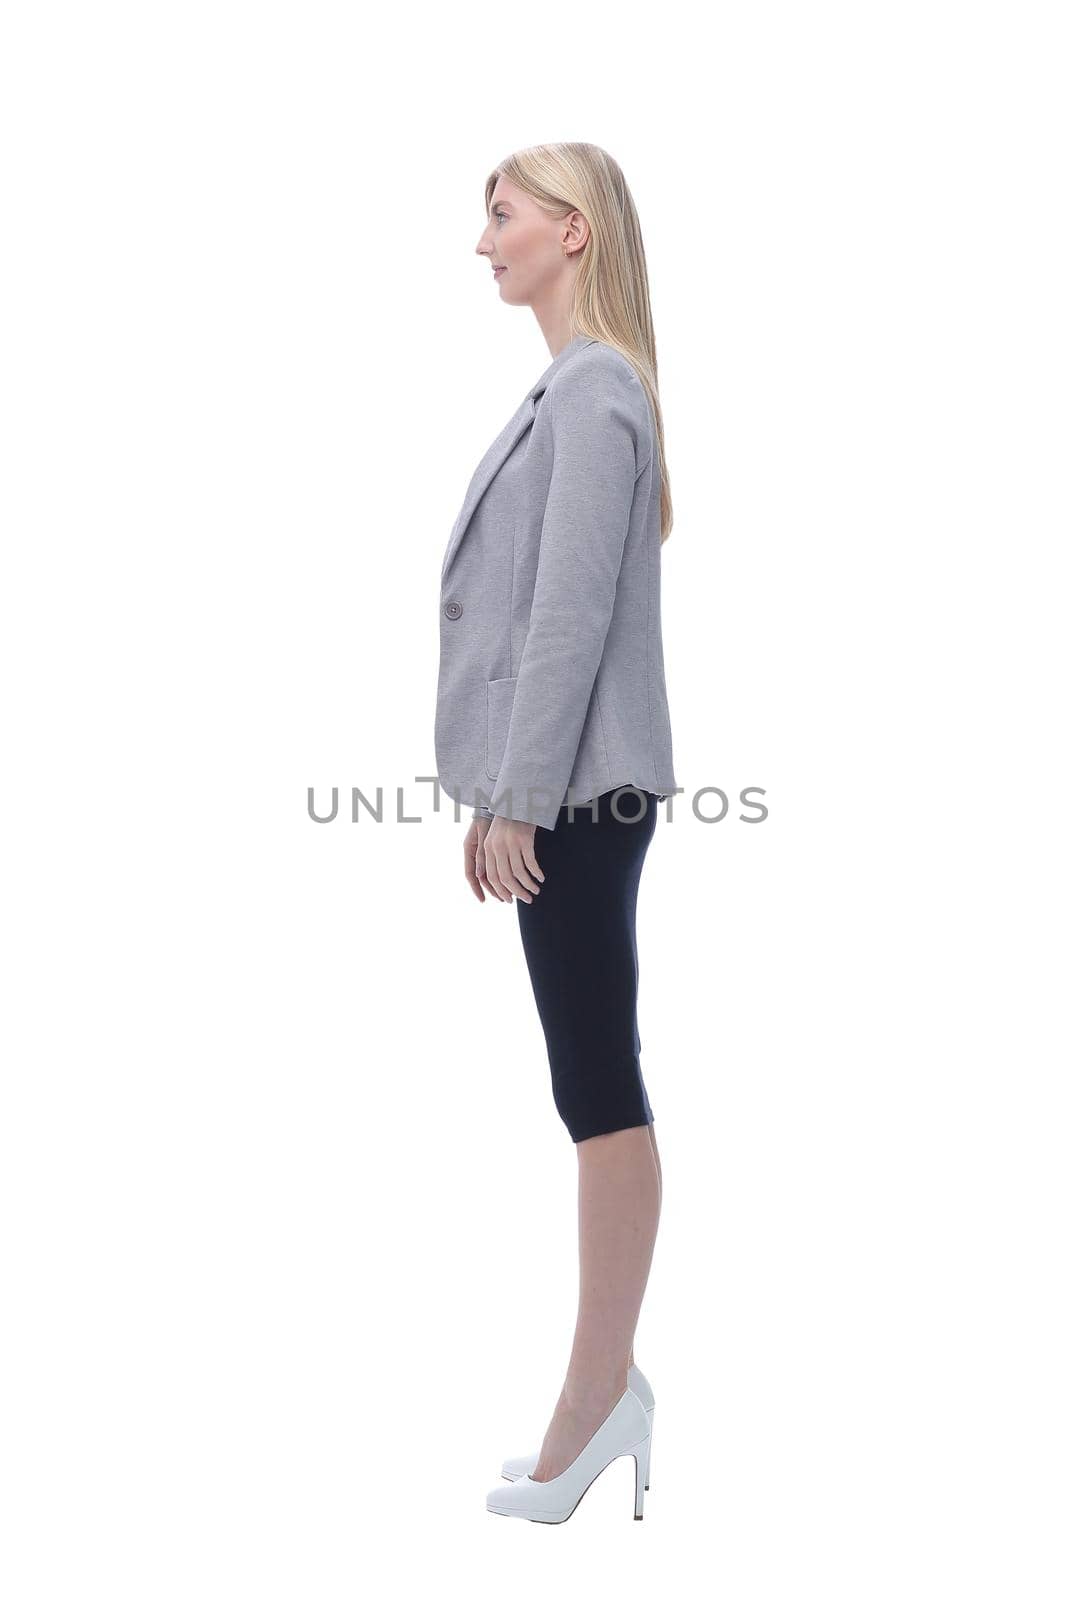 side view. successful business woman. isolated on white background